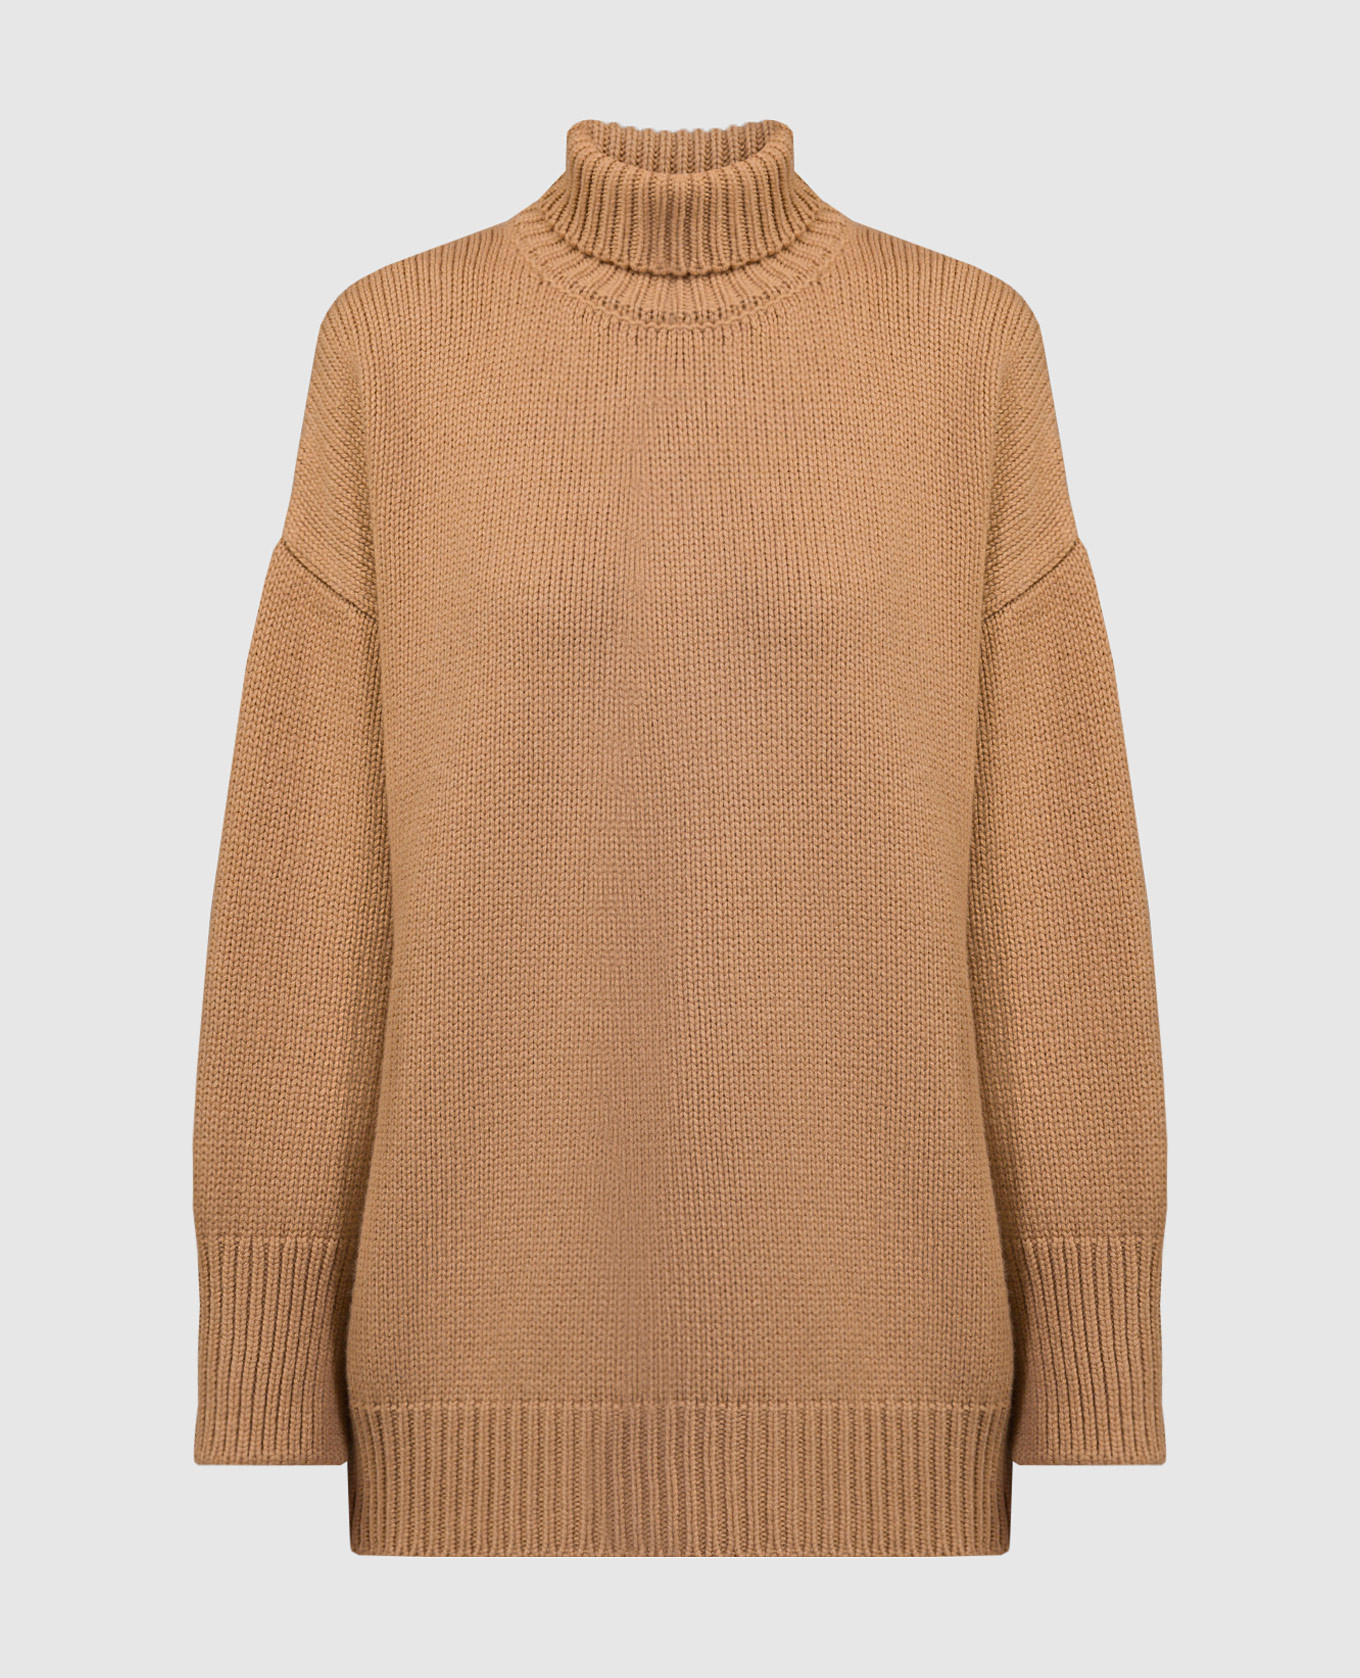 Brown wool and cashmere sweater